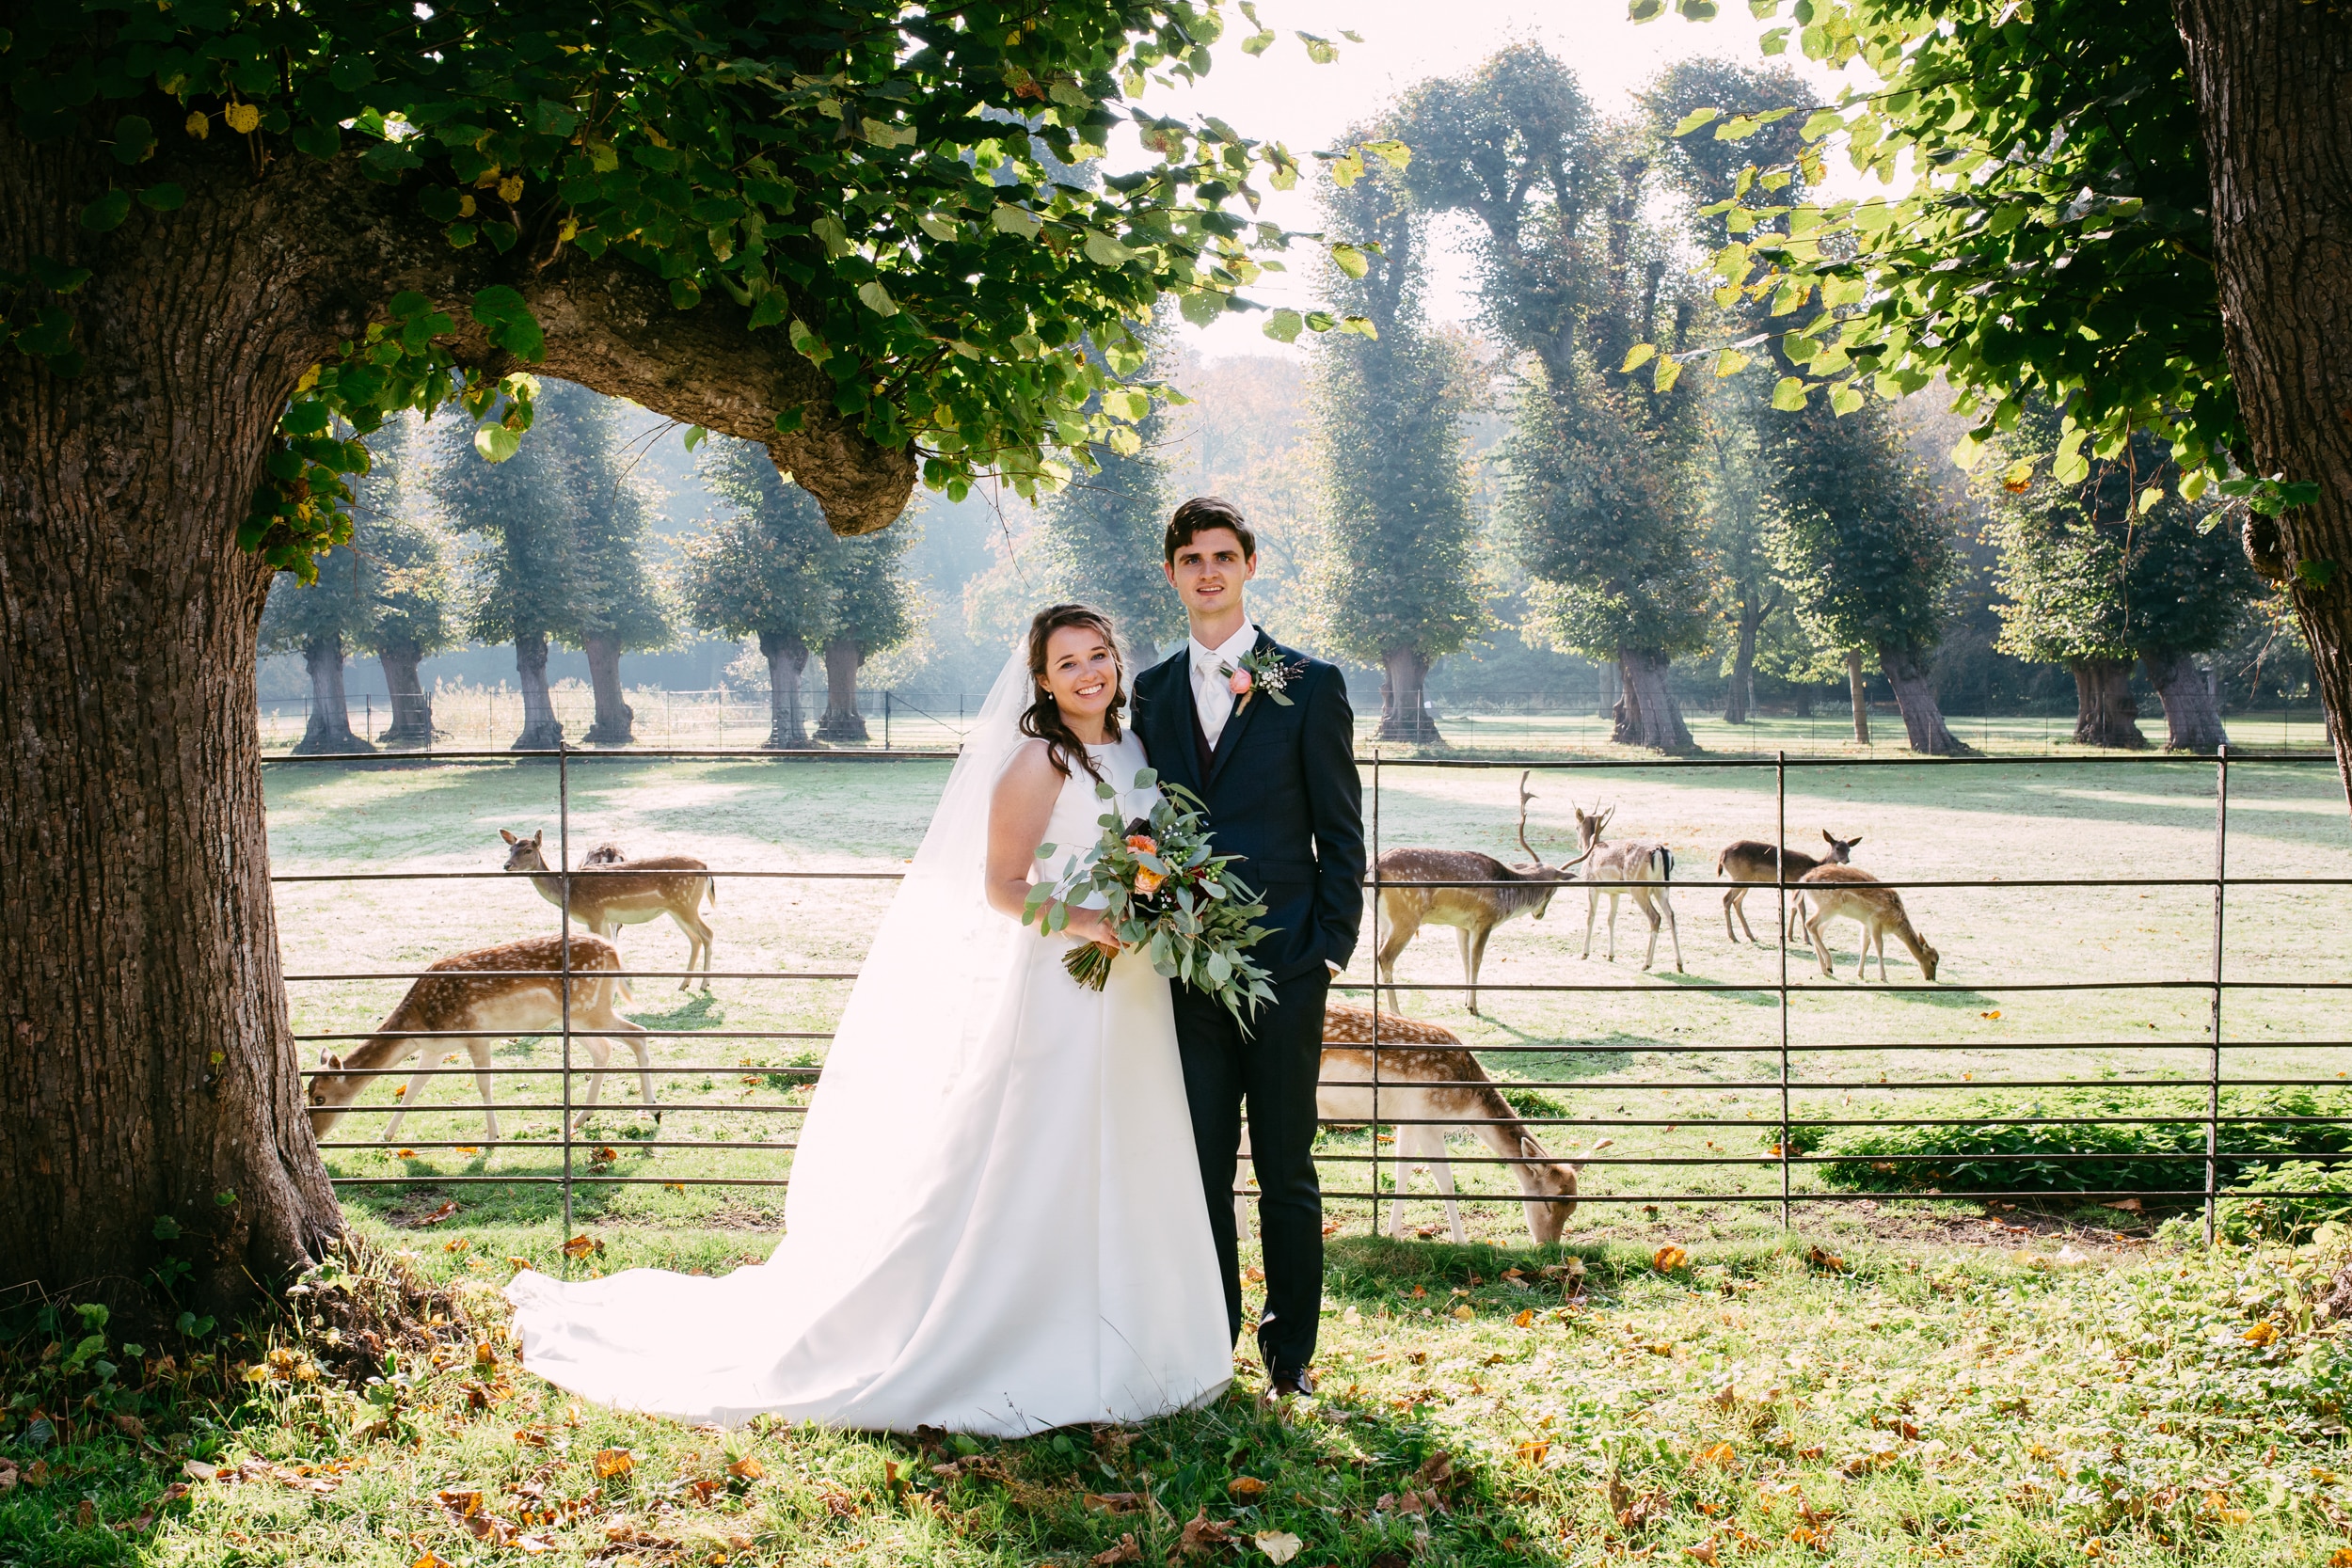 A bride and groom stand in a picturesque field surrounded by elegant deer.